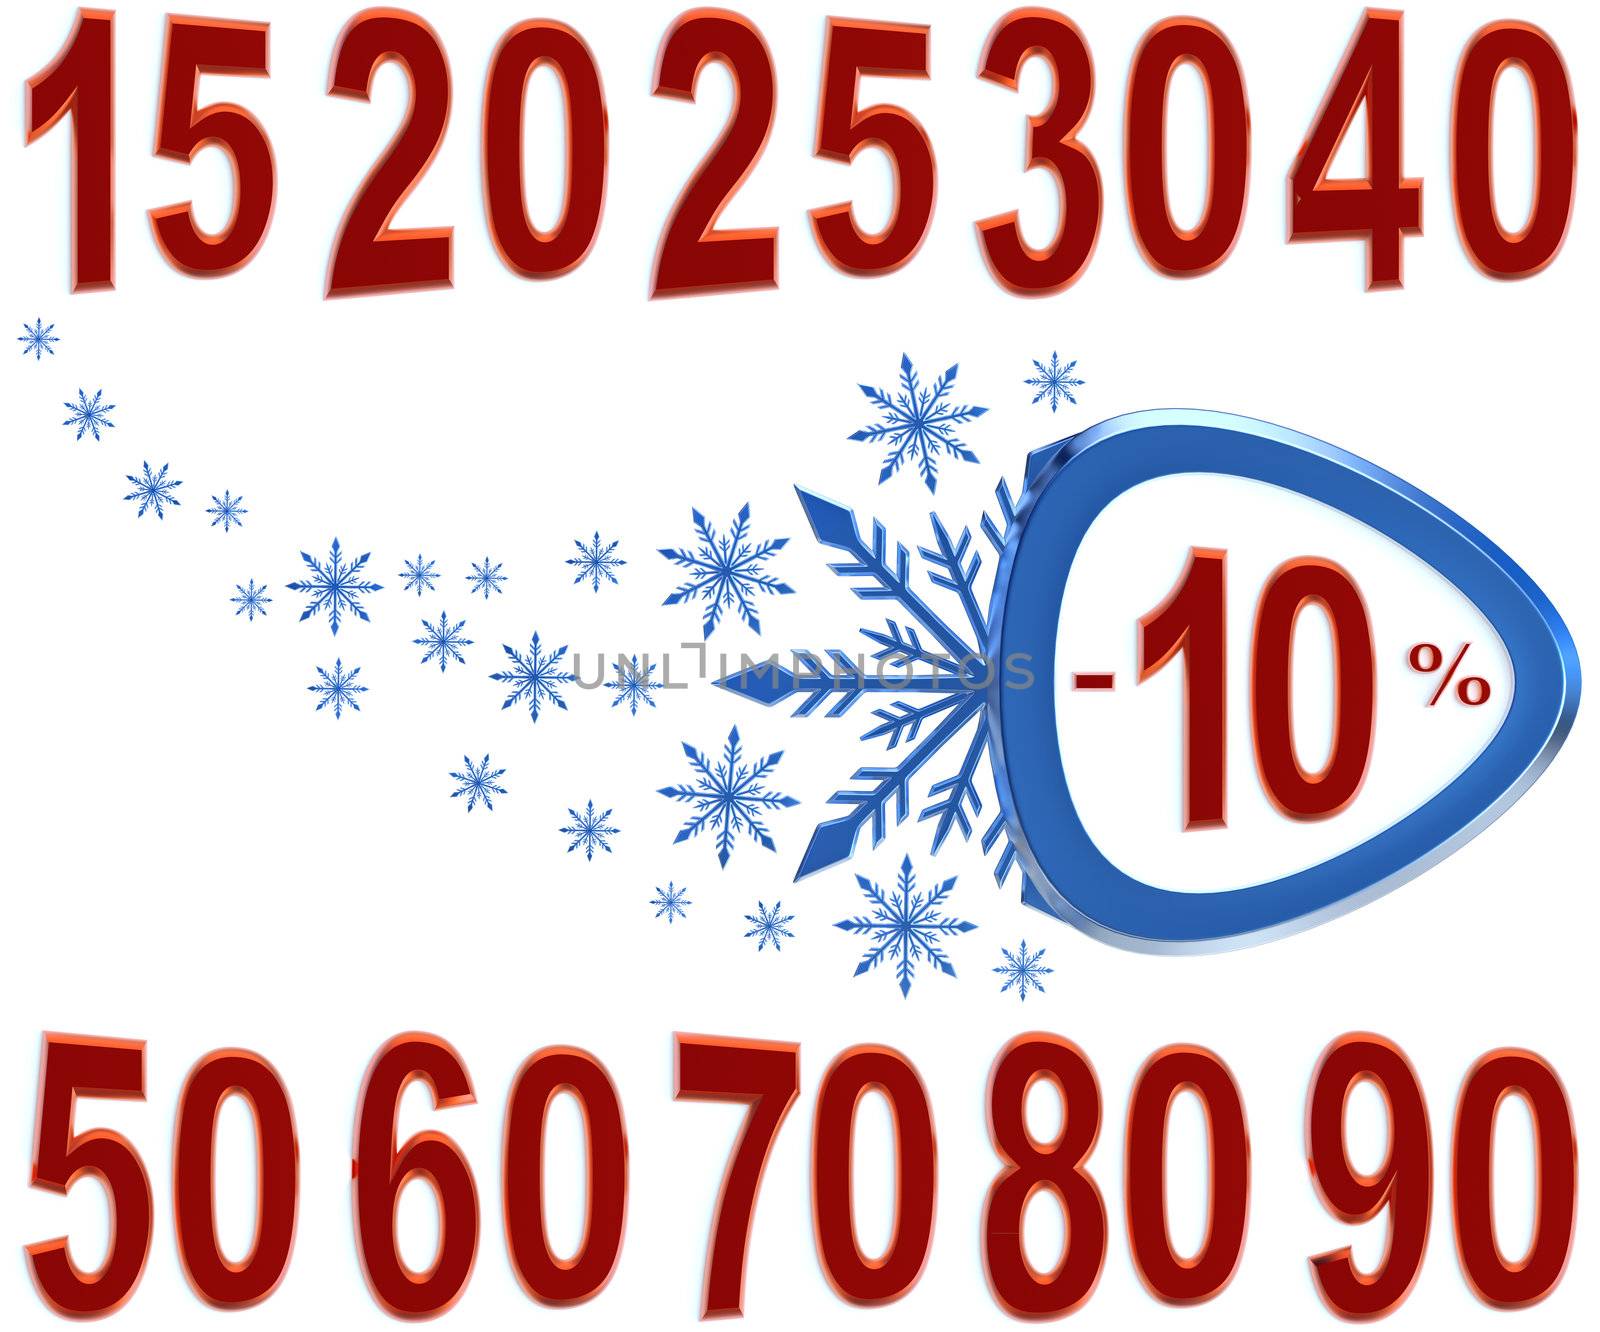 arrow shaped label / sticker for sales with big variety of winter discounts